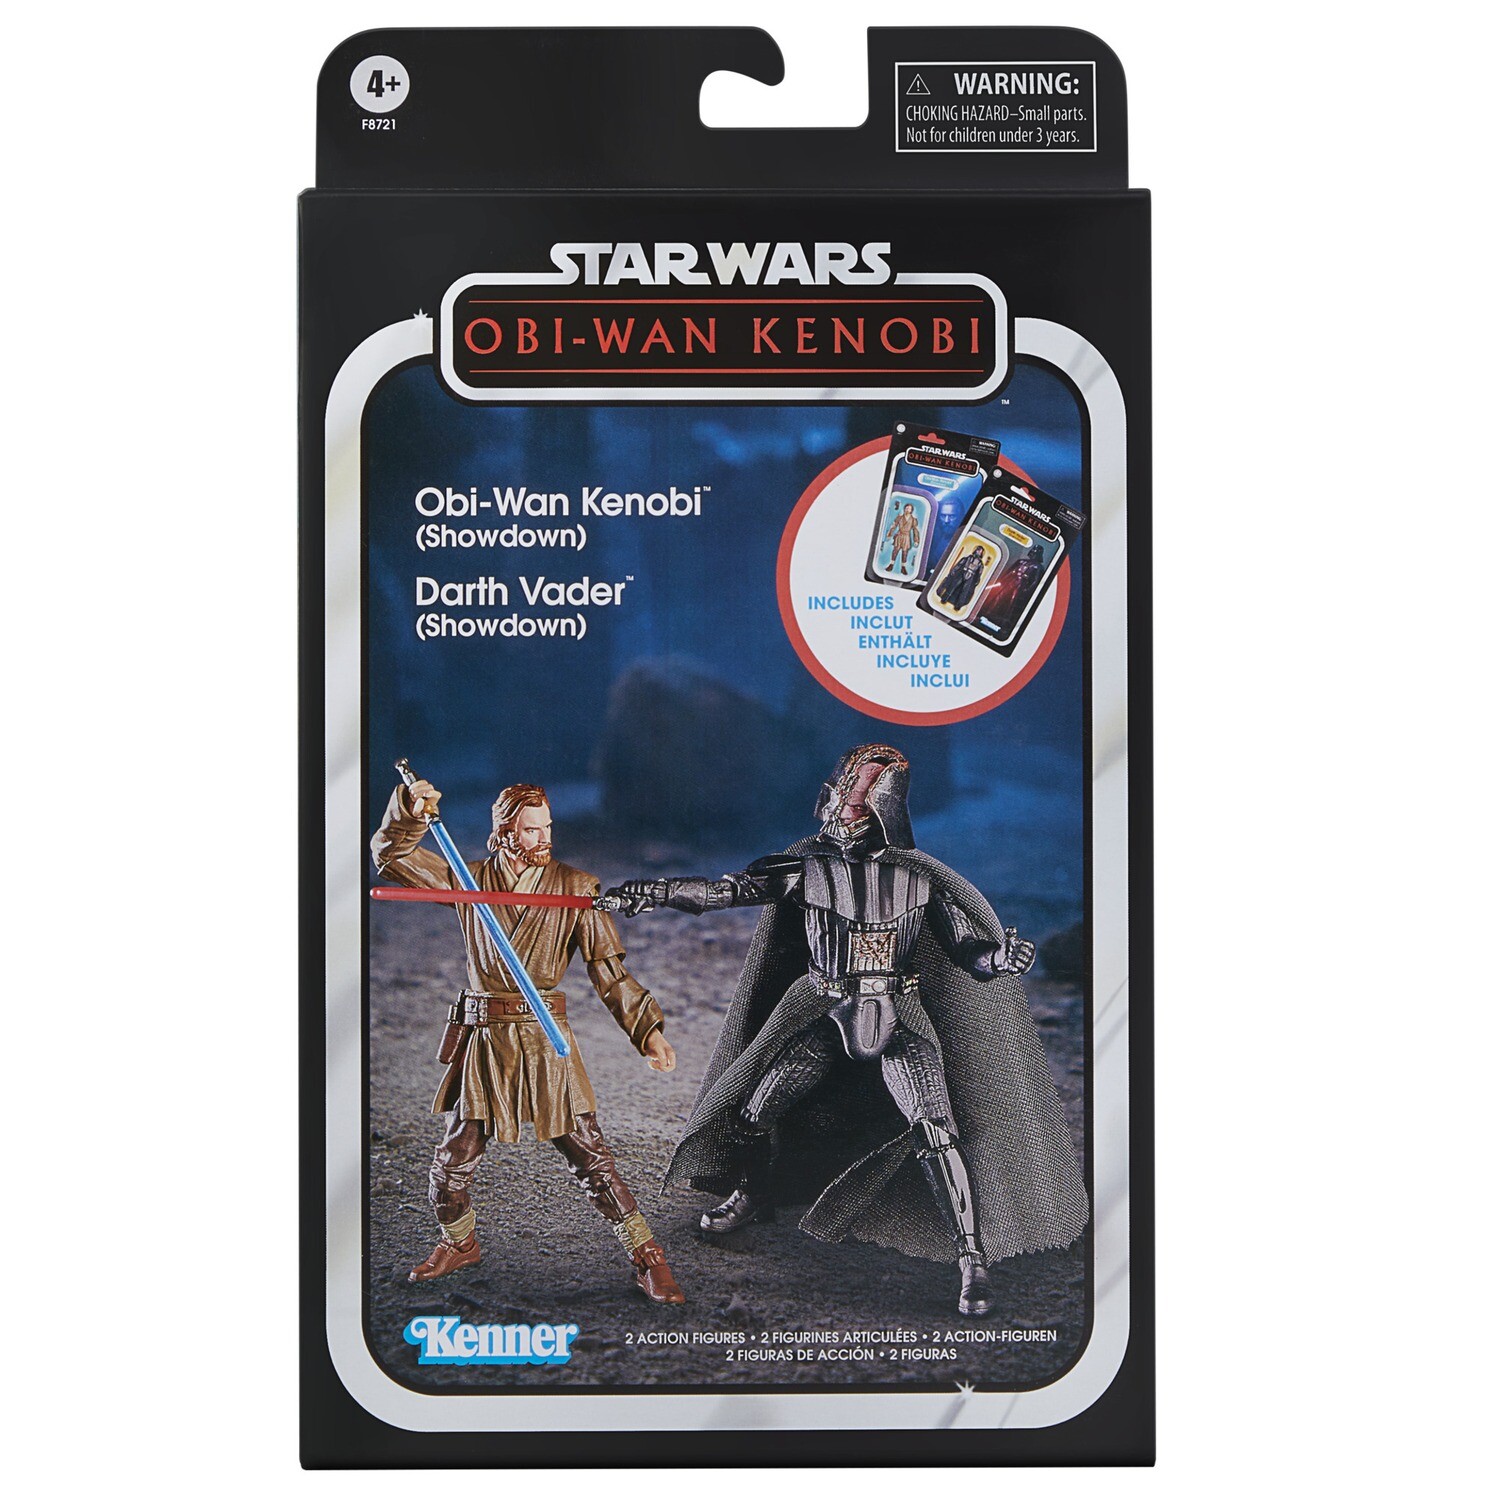  STAR WARS The Vintage Collection Darth Vader (The Dark Times)  Toy, 3.75-Inch-Scale OBI-Wan Kenobi Figure, Toys Kids Ages 4 and Up : Toys  & Games